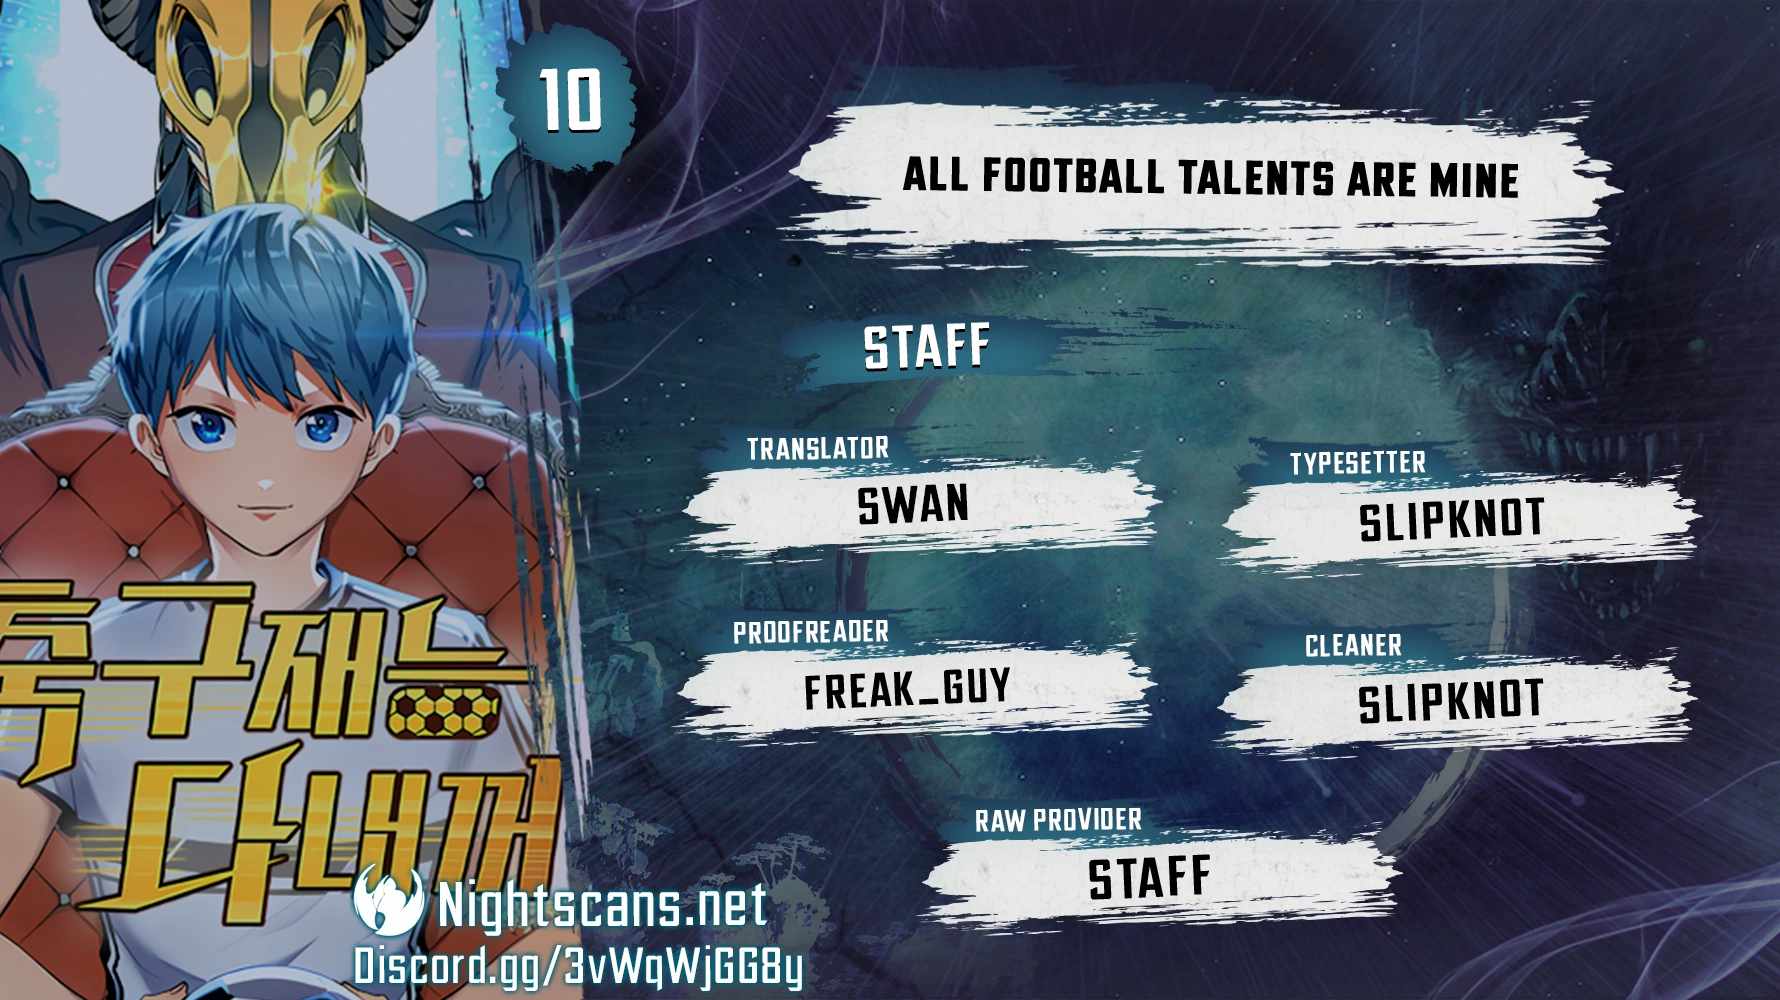 All Soccer Talents Are Mine - 10 page 1-ea0109f2